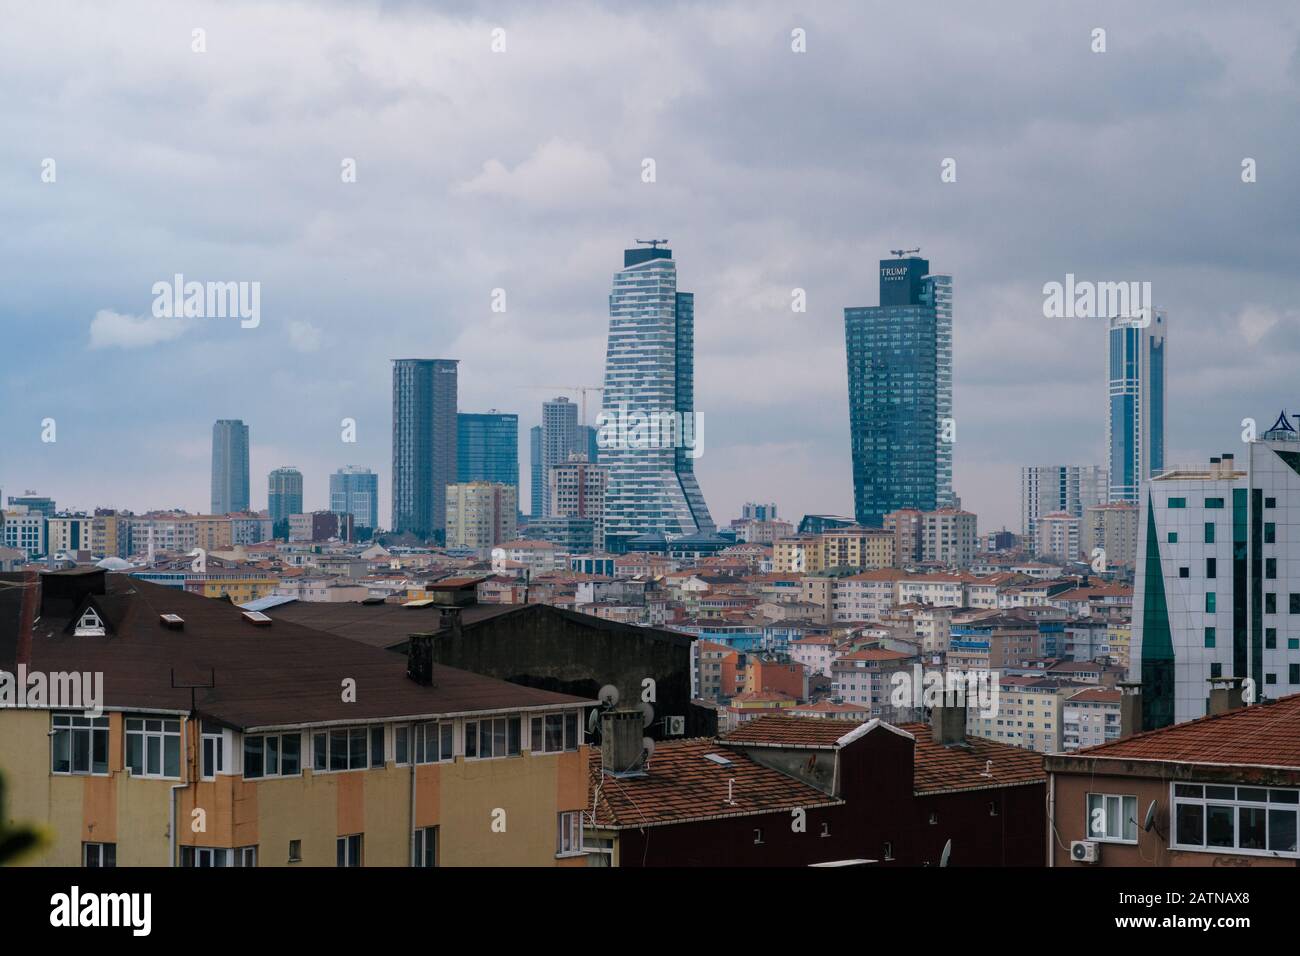 istanbul turkey jan 12 2020 view of the trump towers istanbul turkey located in the district of mecidiyekoy stock photo alamy